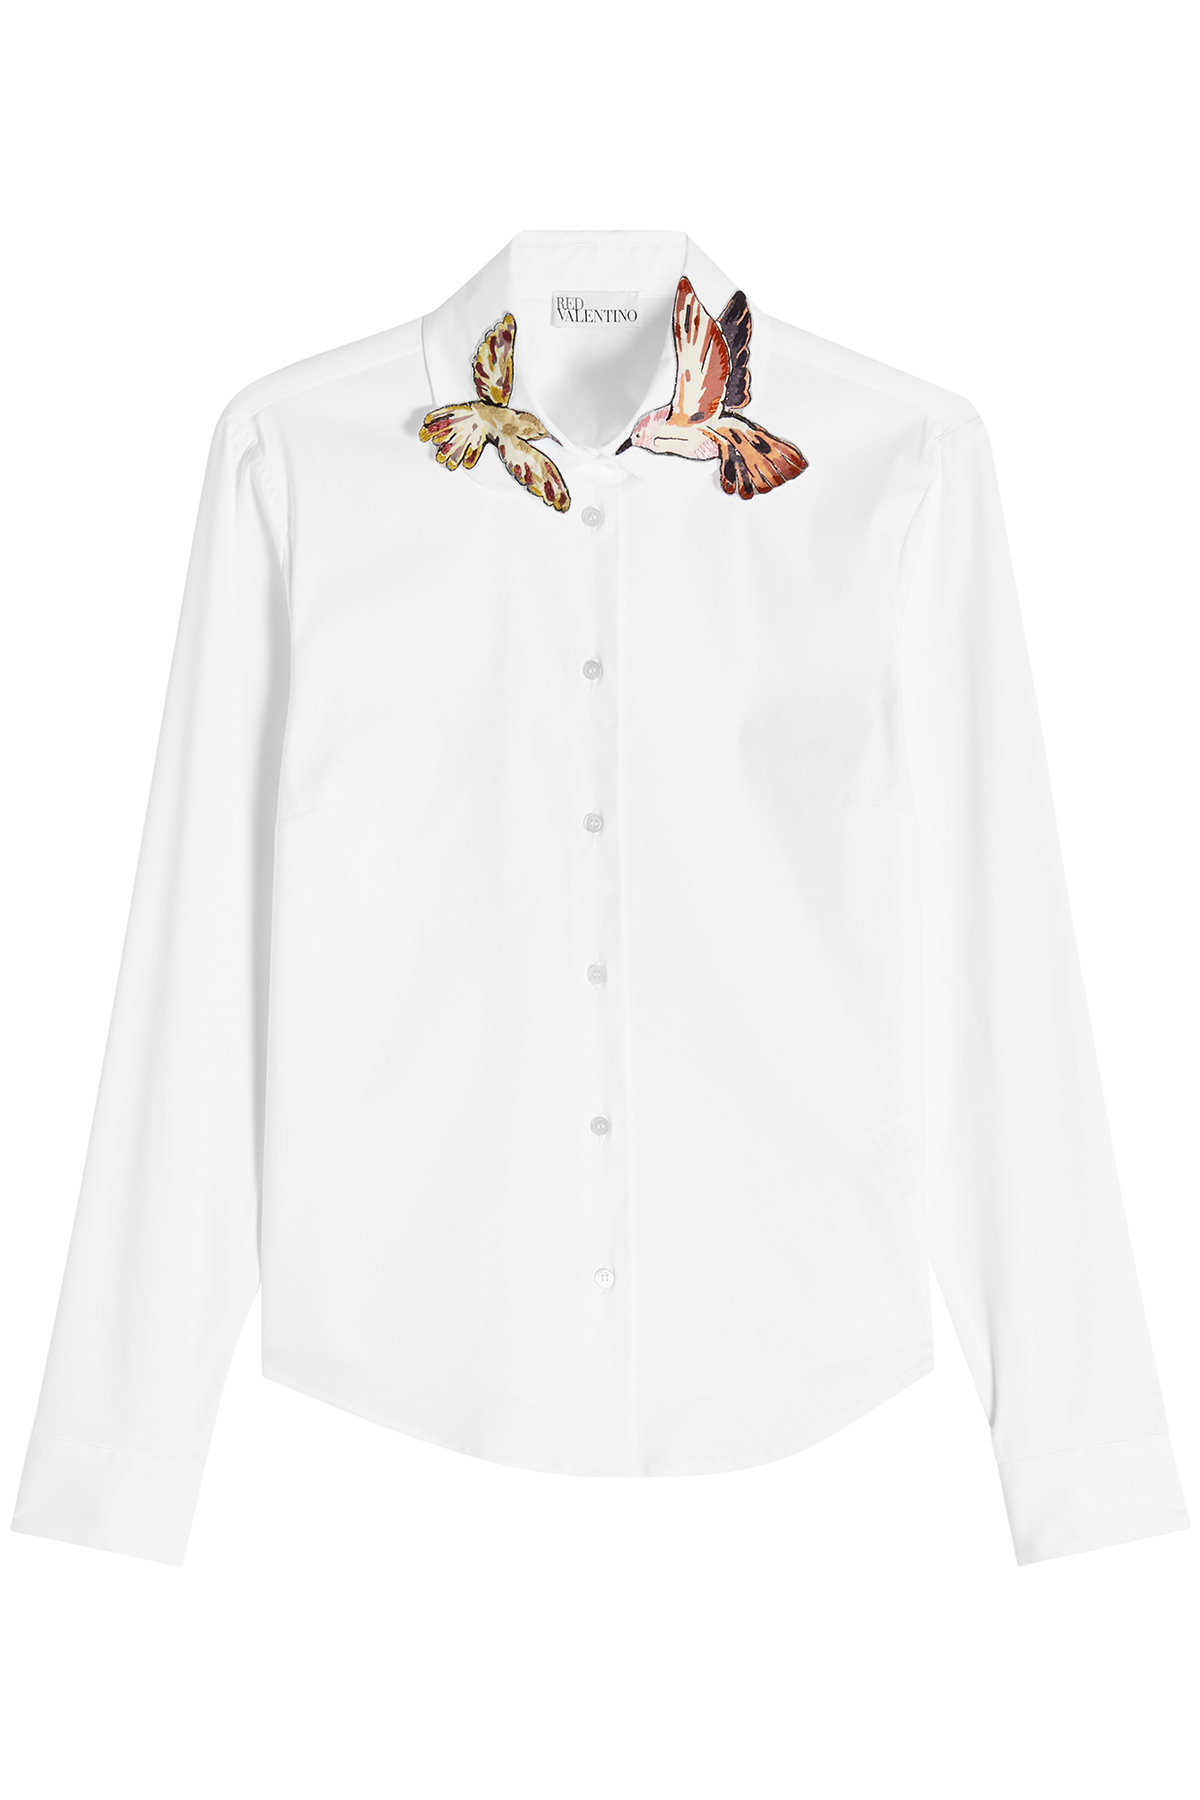 Red Valentino - Cotton-Blend Shirt with Appliqué Collar